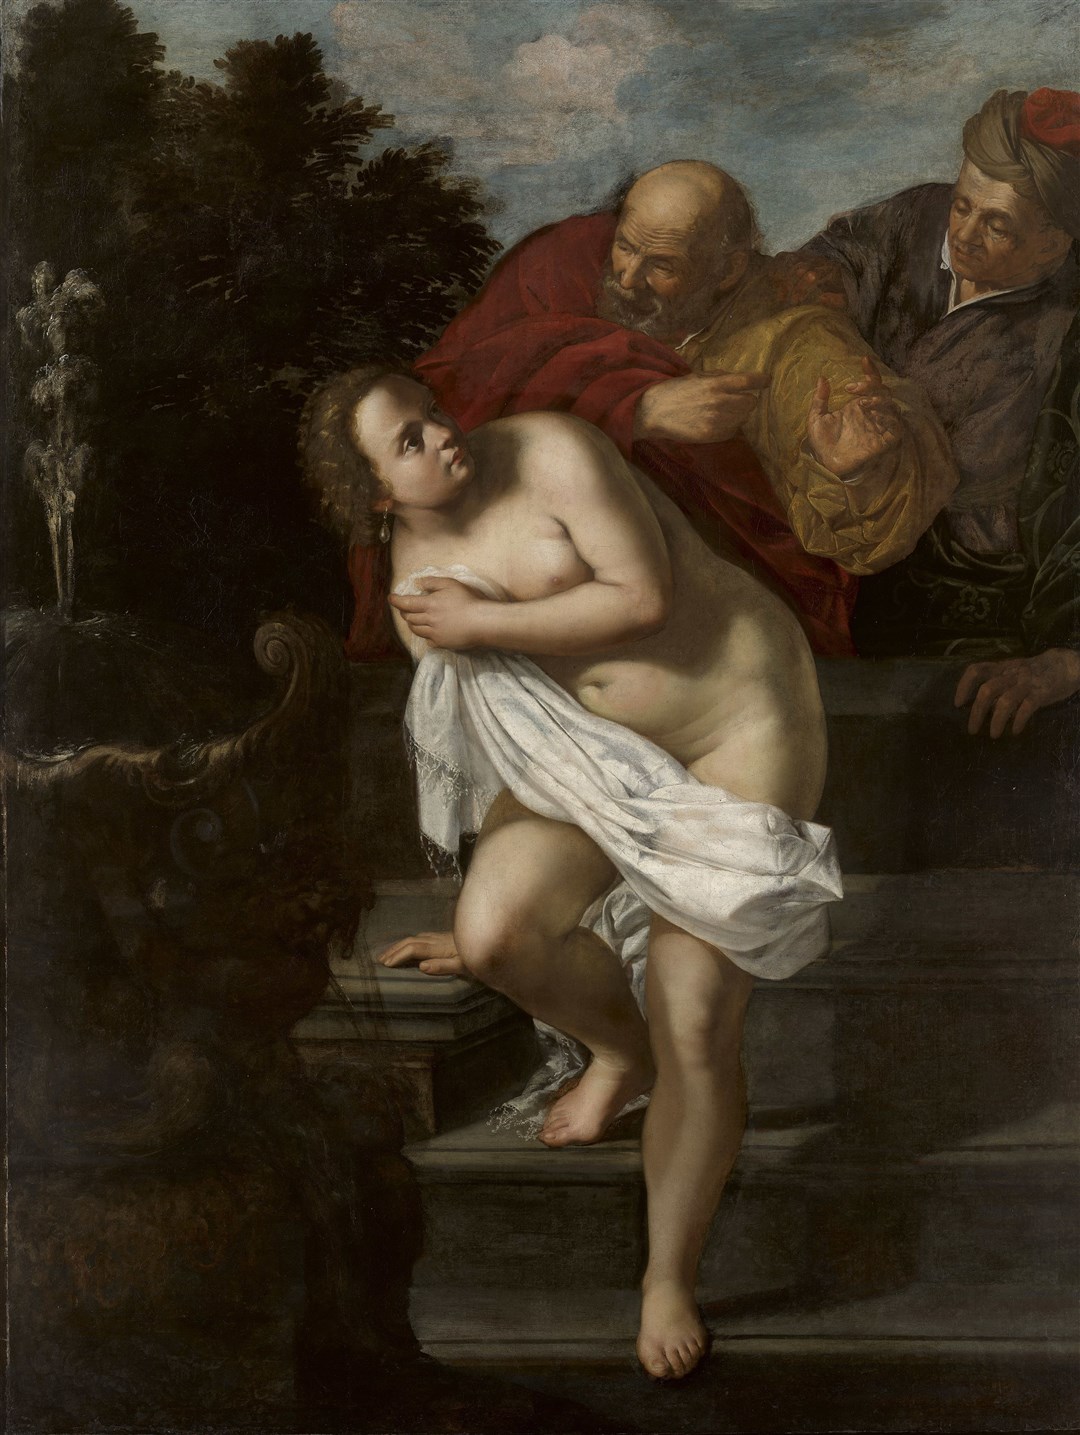 Susanna and the Elders, c1638-9, by Artemisia Gentileschi, following the completion of extensive conservation treatment (Royal Collection Trust/PA)